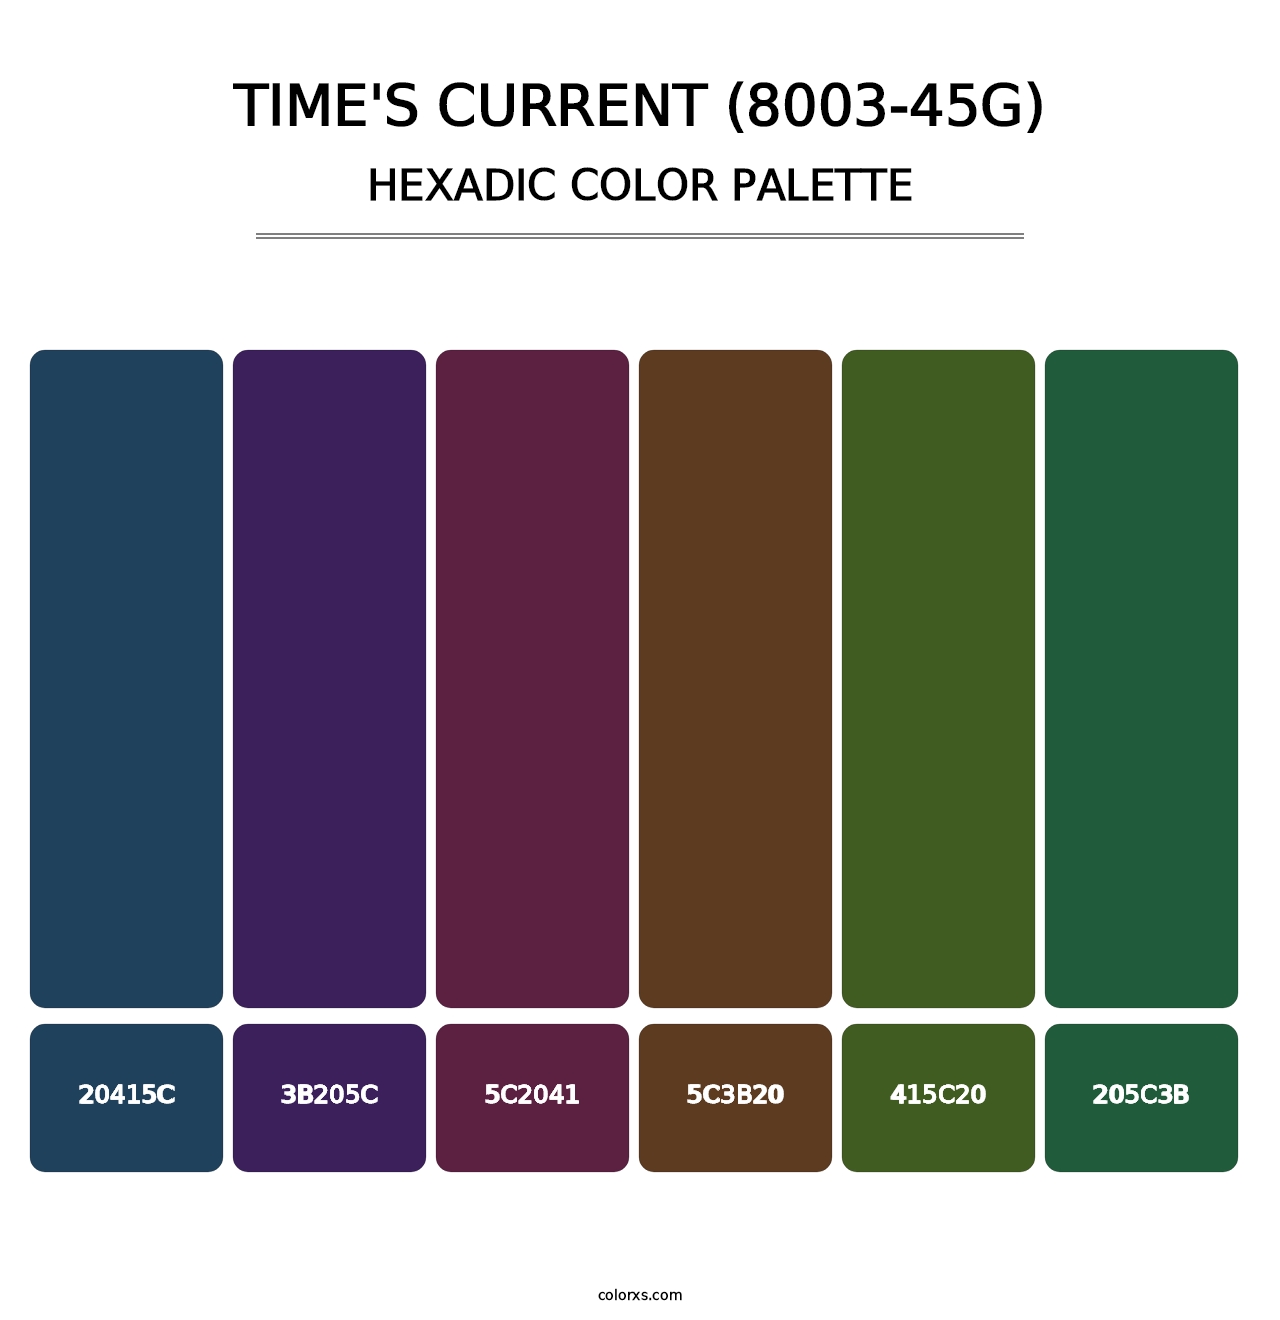 Time's Current (8003-45G) - Hexadic Color Palette